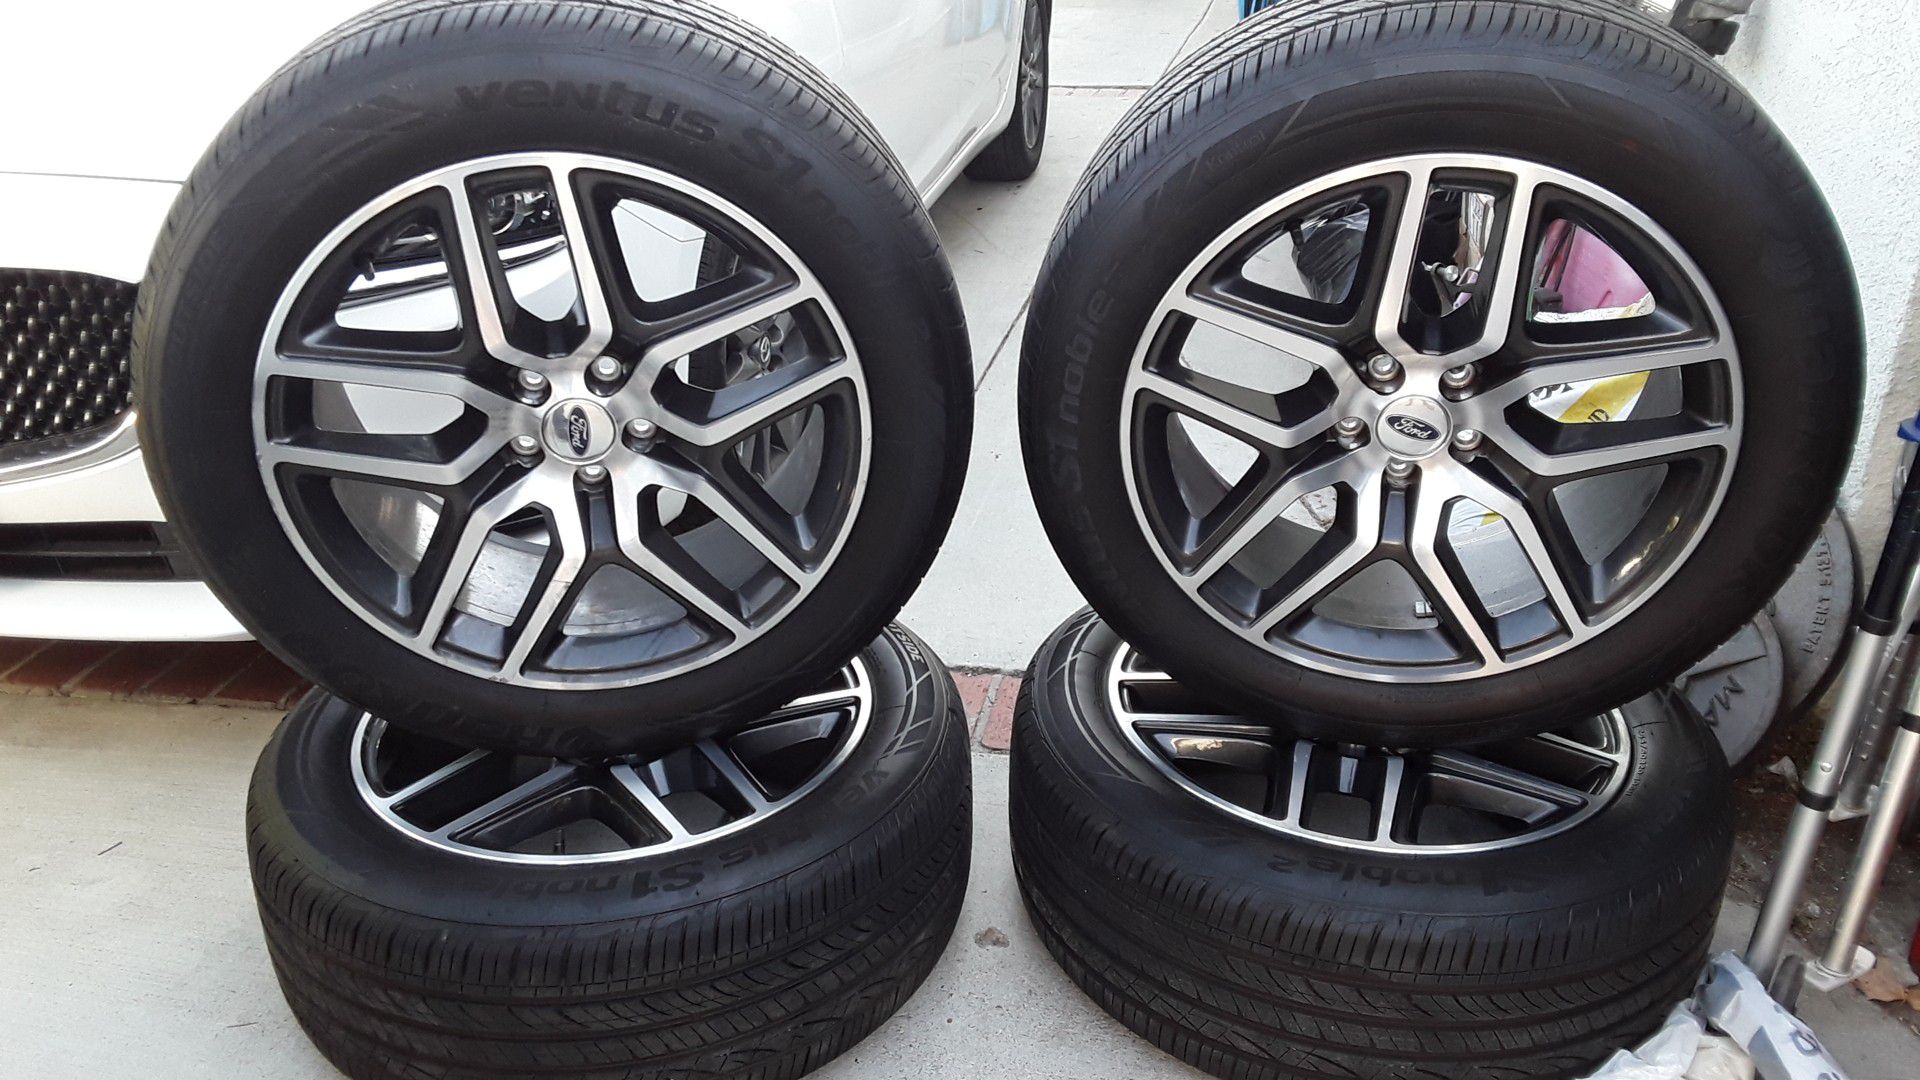 Set of new tires with rims.